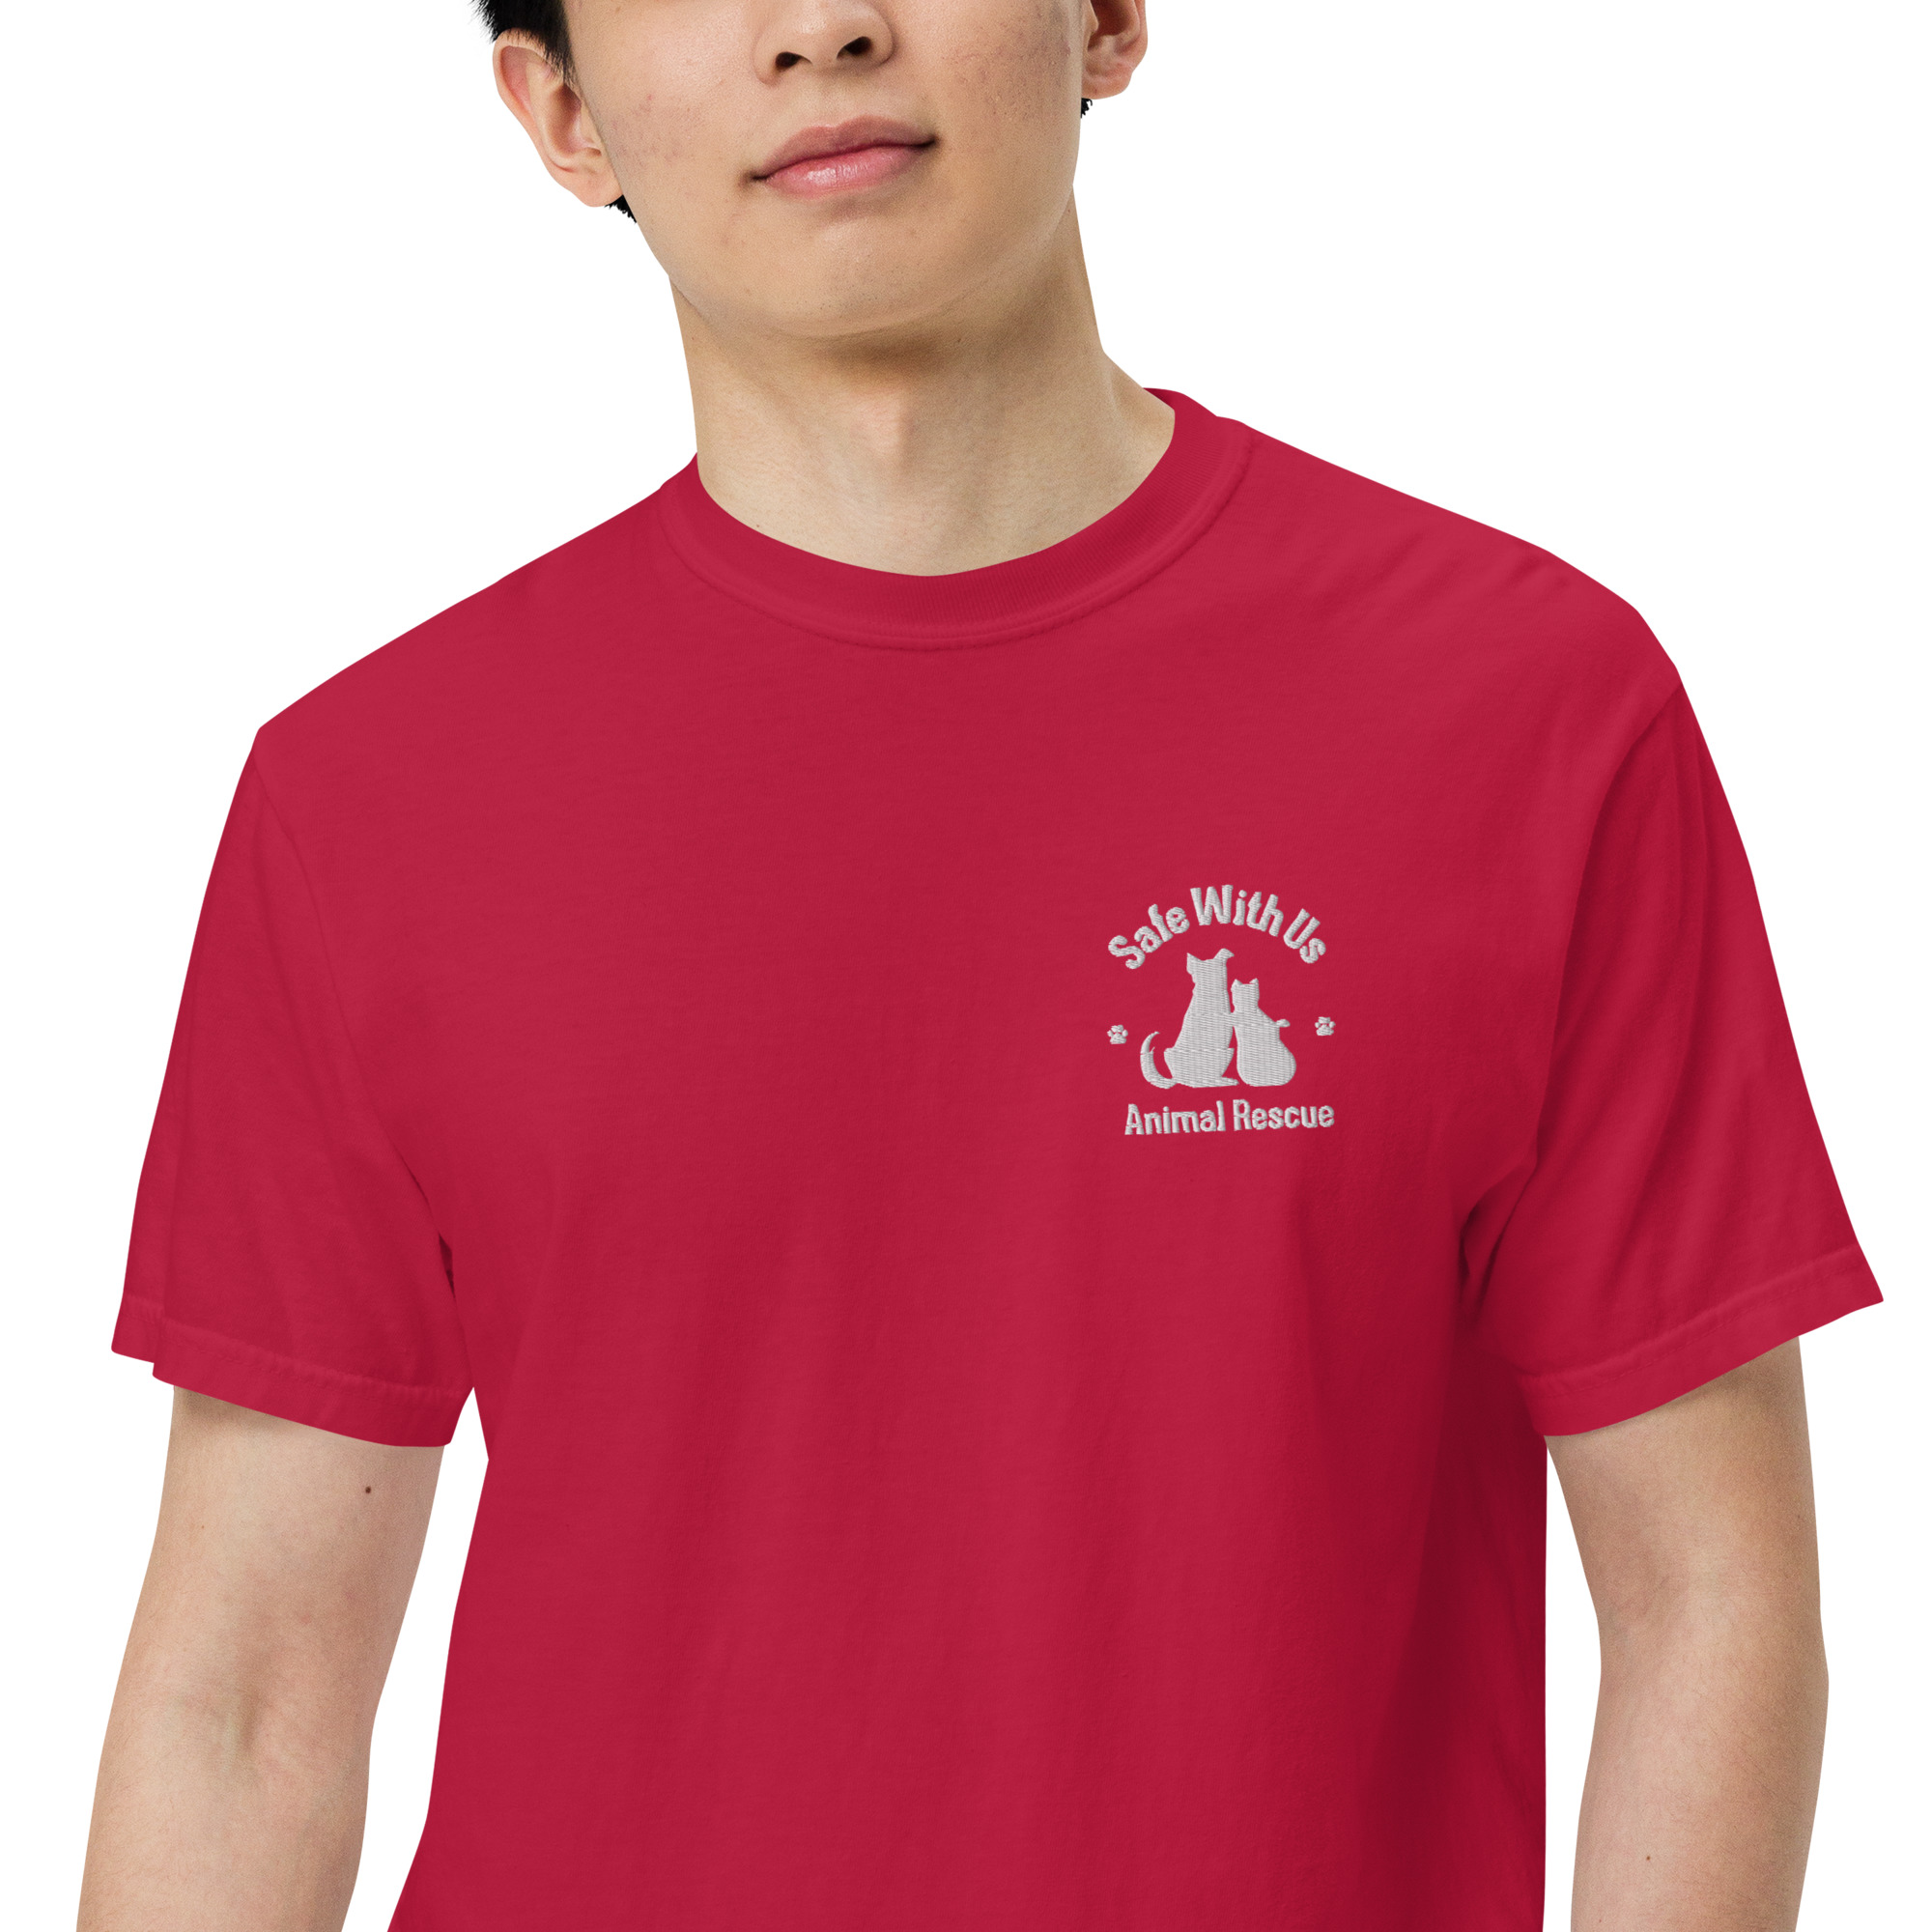 mens-garment-dyed-heavyweight-t-shirt-red-zoomed-in-2-6415fedc24db3-1.jpg